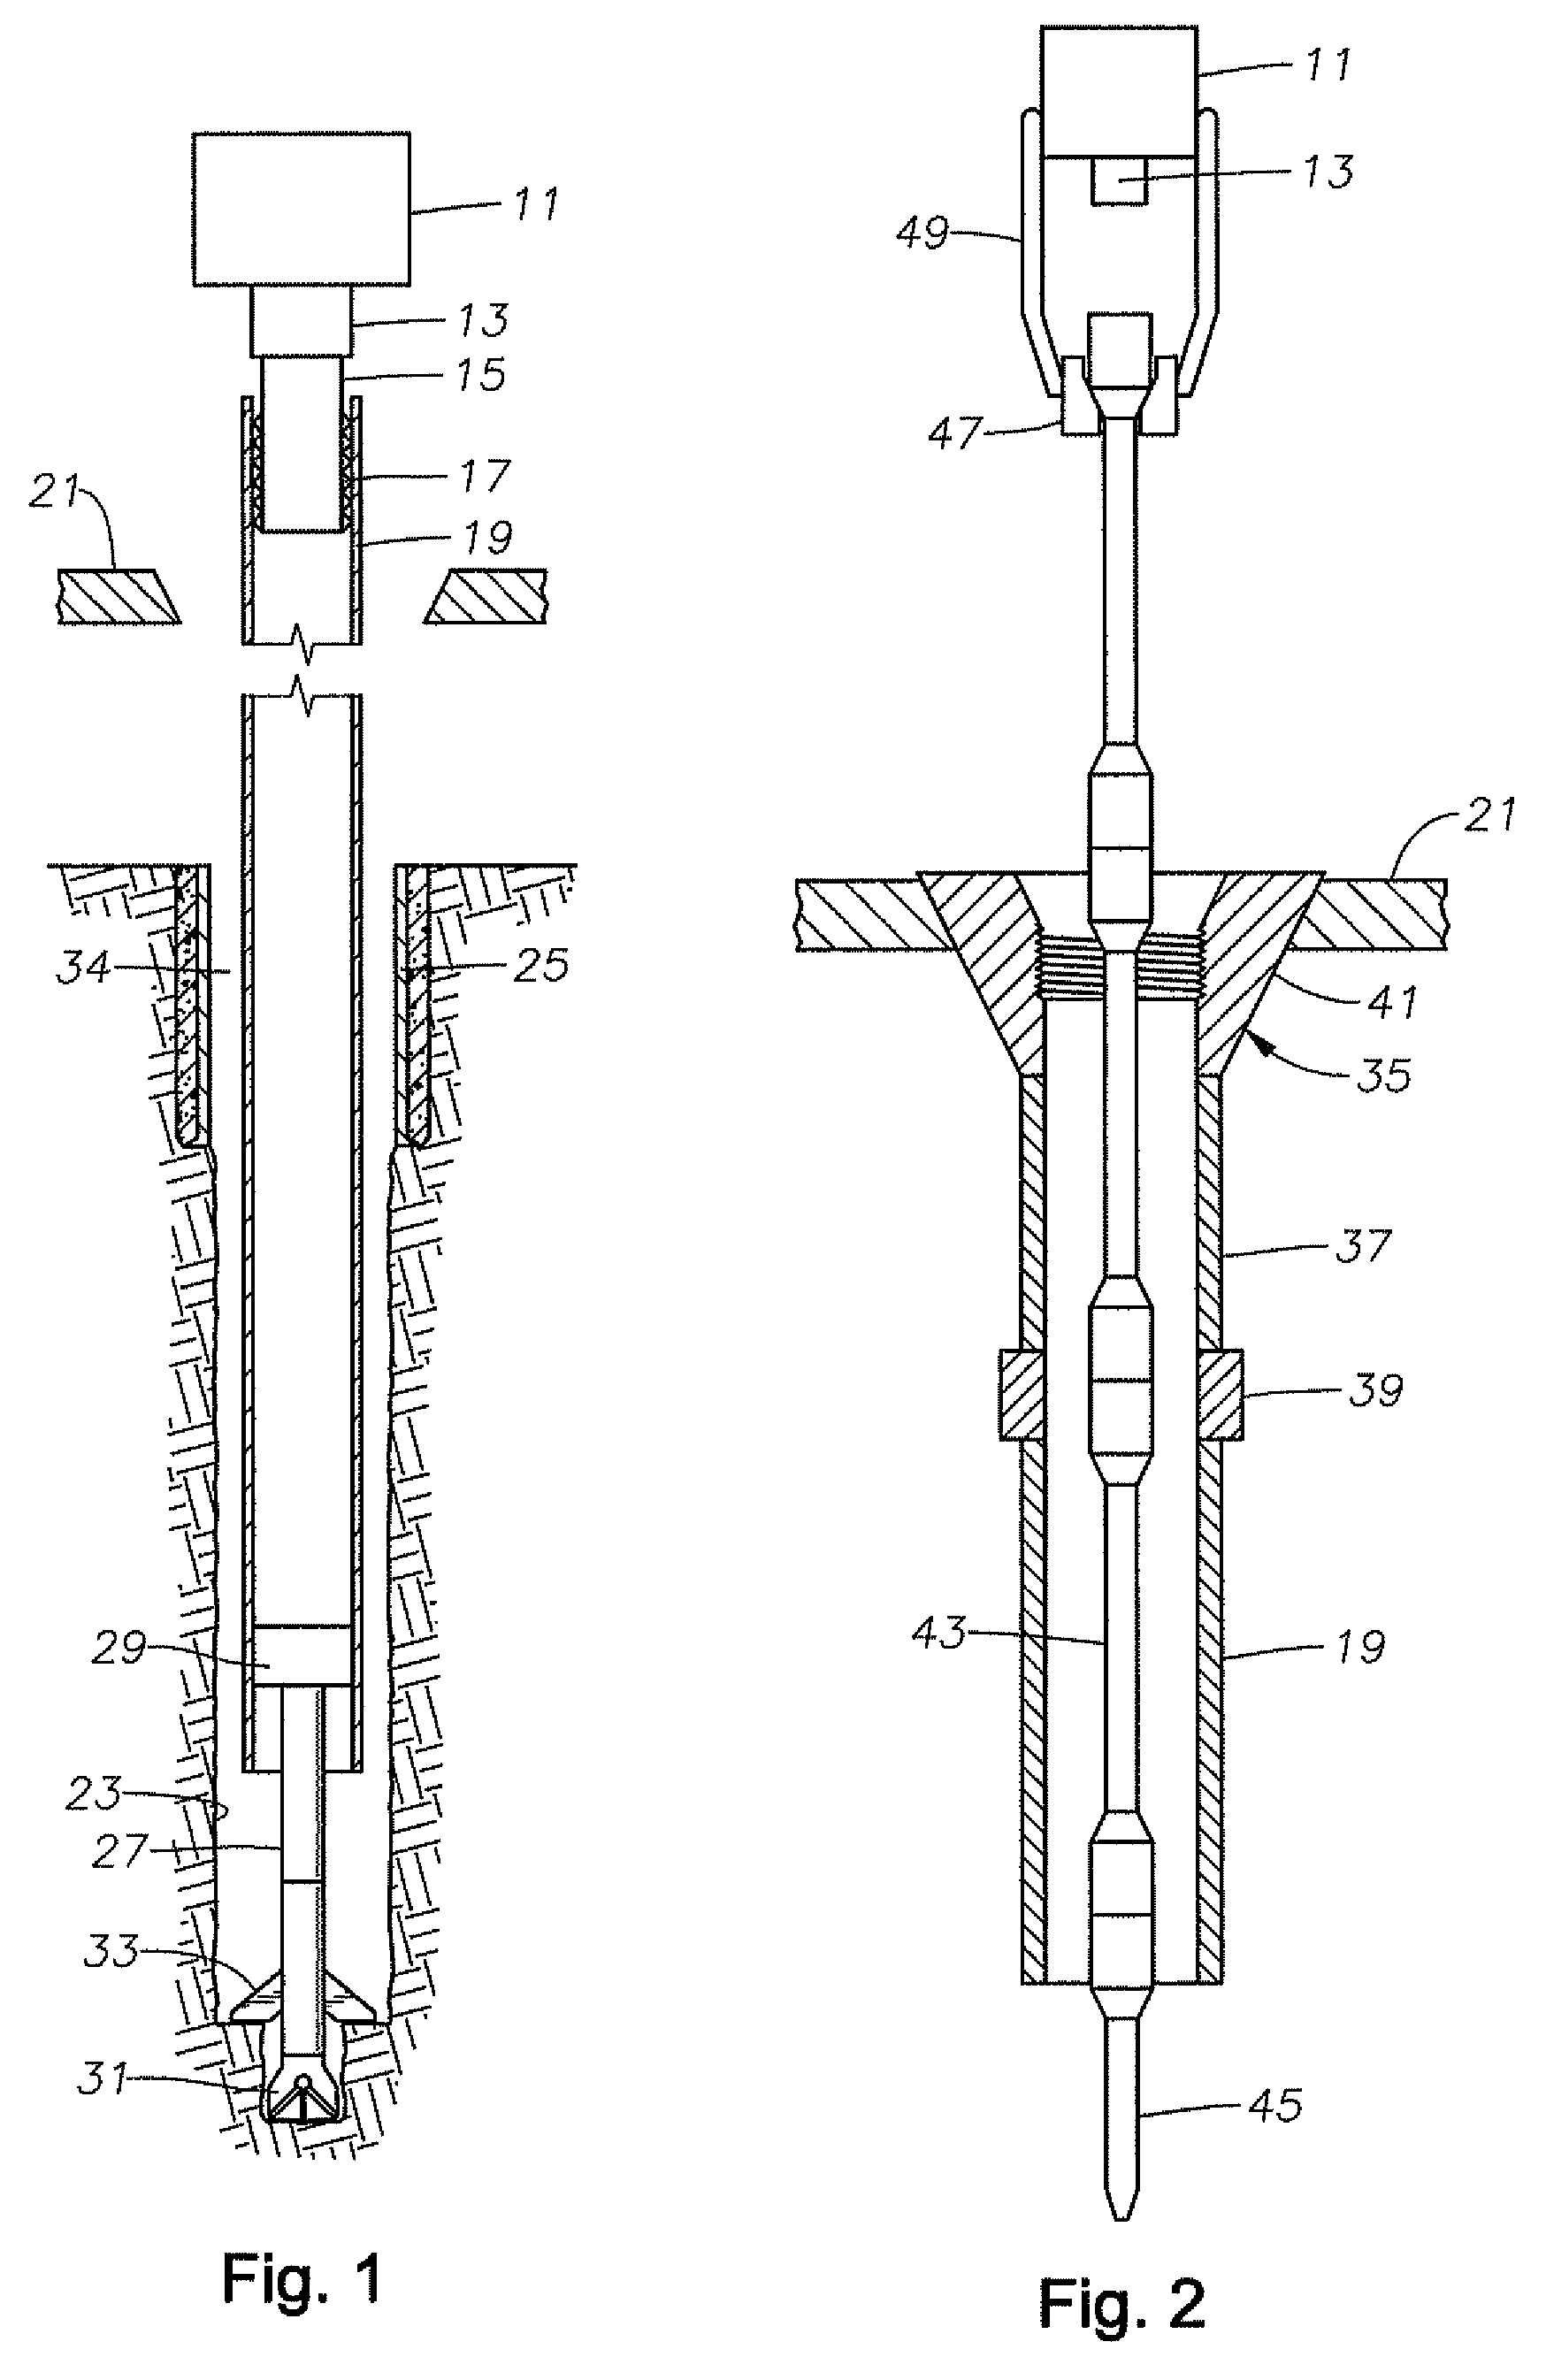 Method of circulating while retrieving downhole tool in casing